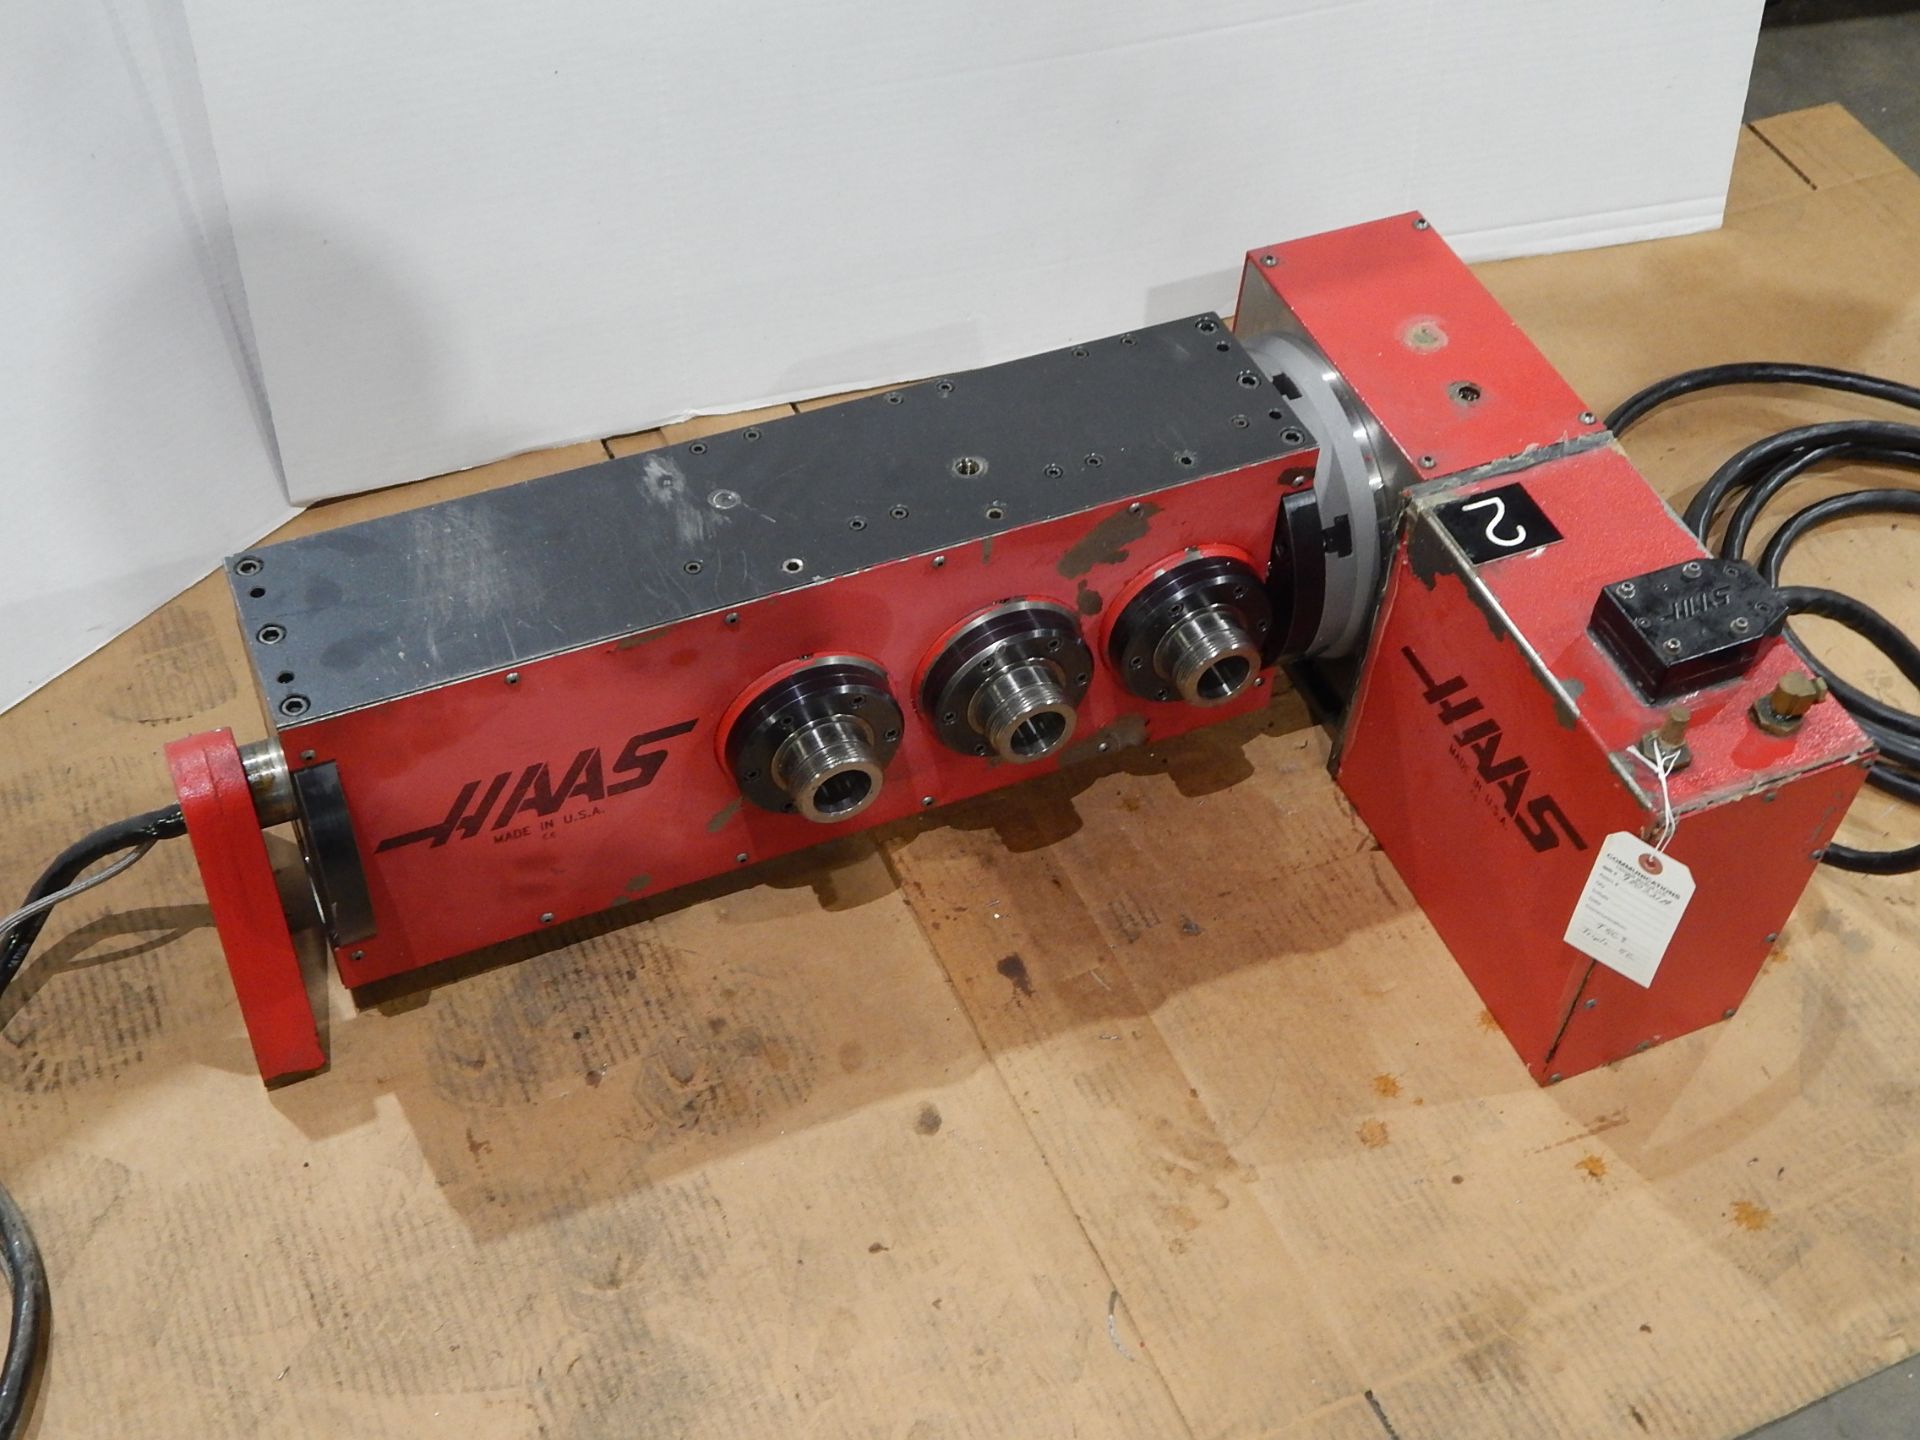 Haas TSC-3 CNC Indexer, s/n 900221A, 4 and 5 Axis, Haas 4th Axis Tilt Rotary Table and (3) Haas 5C